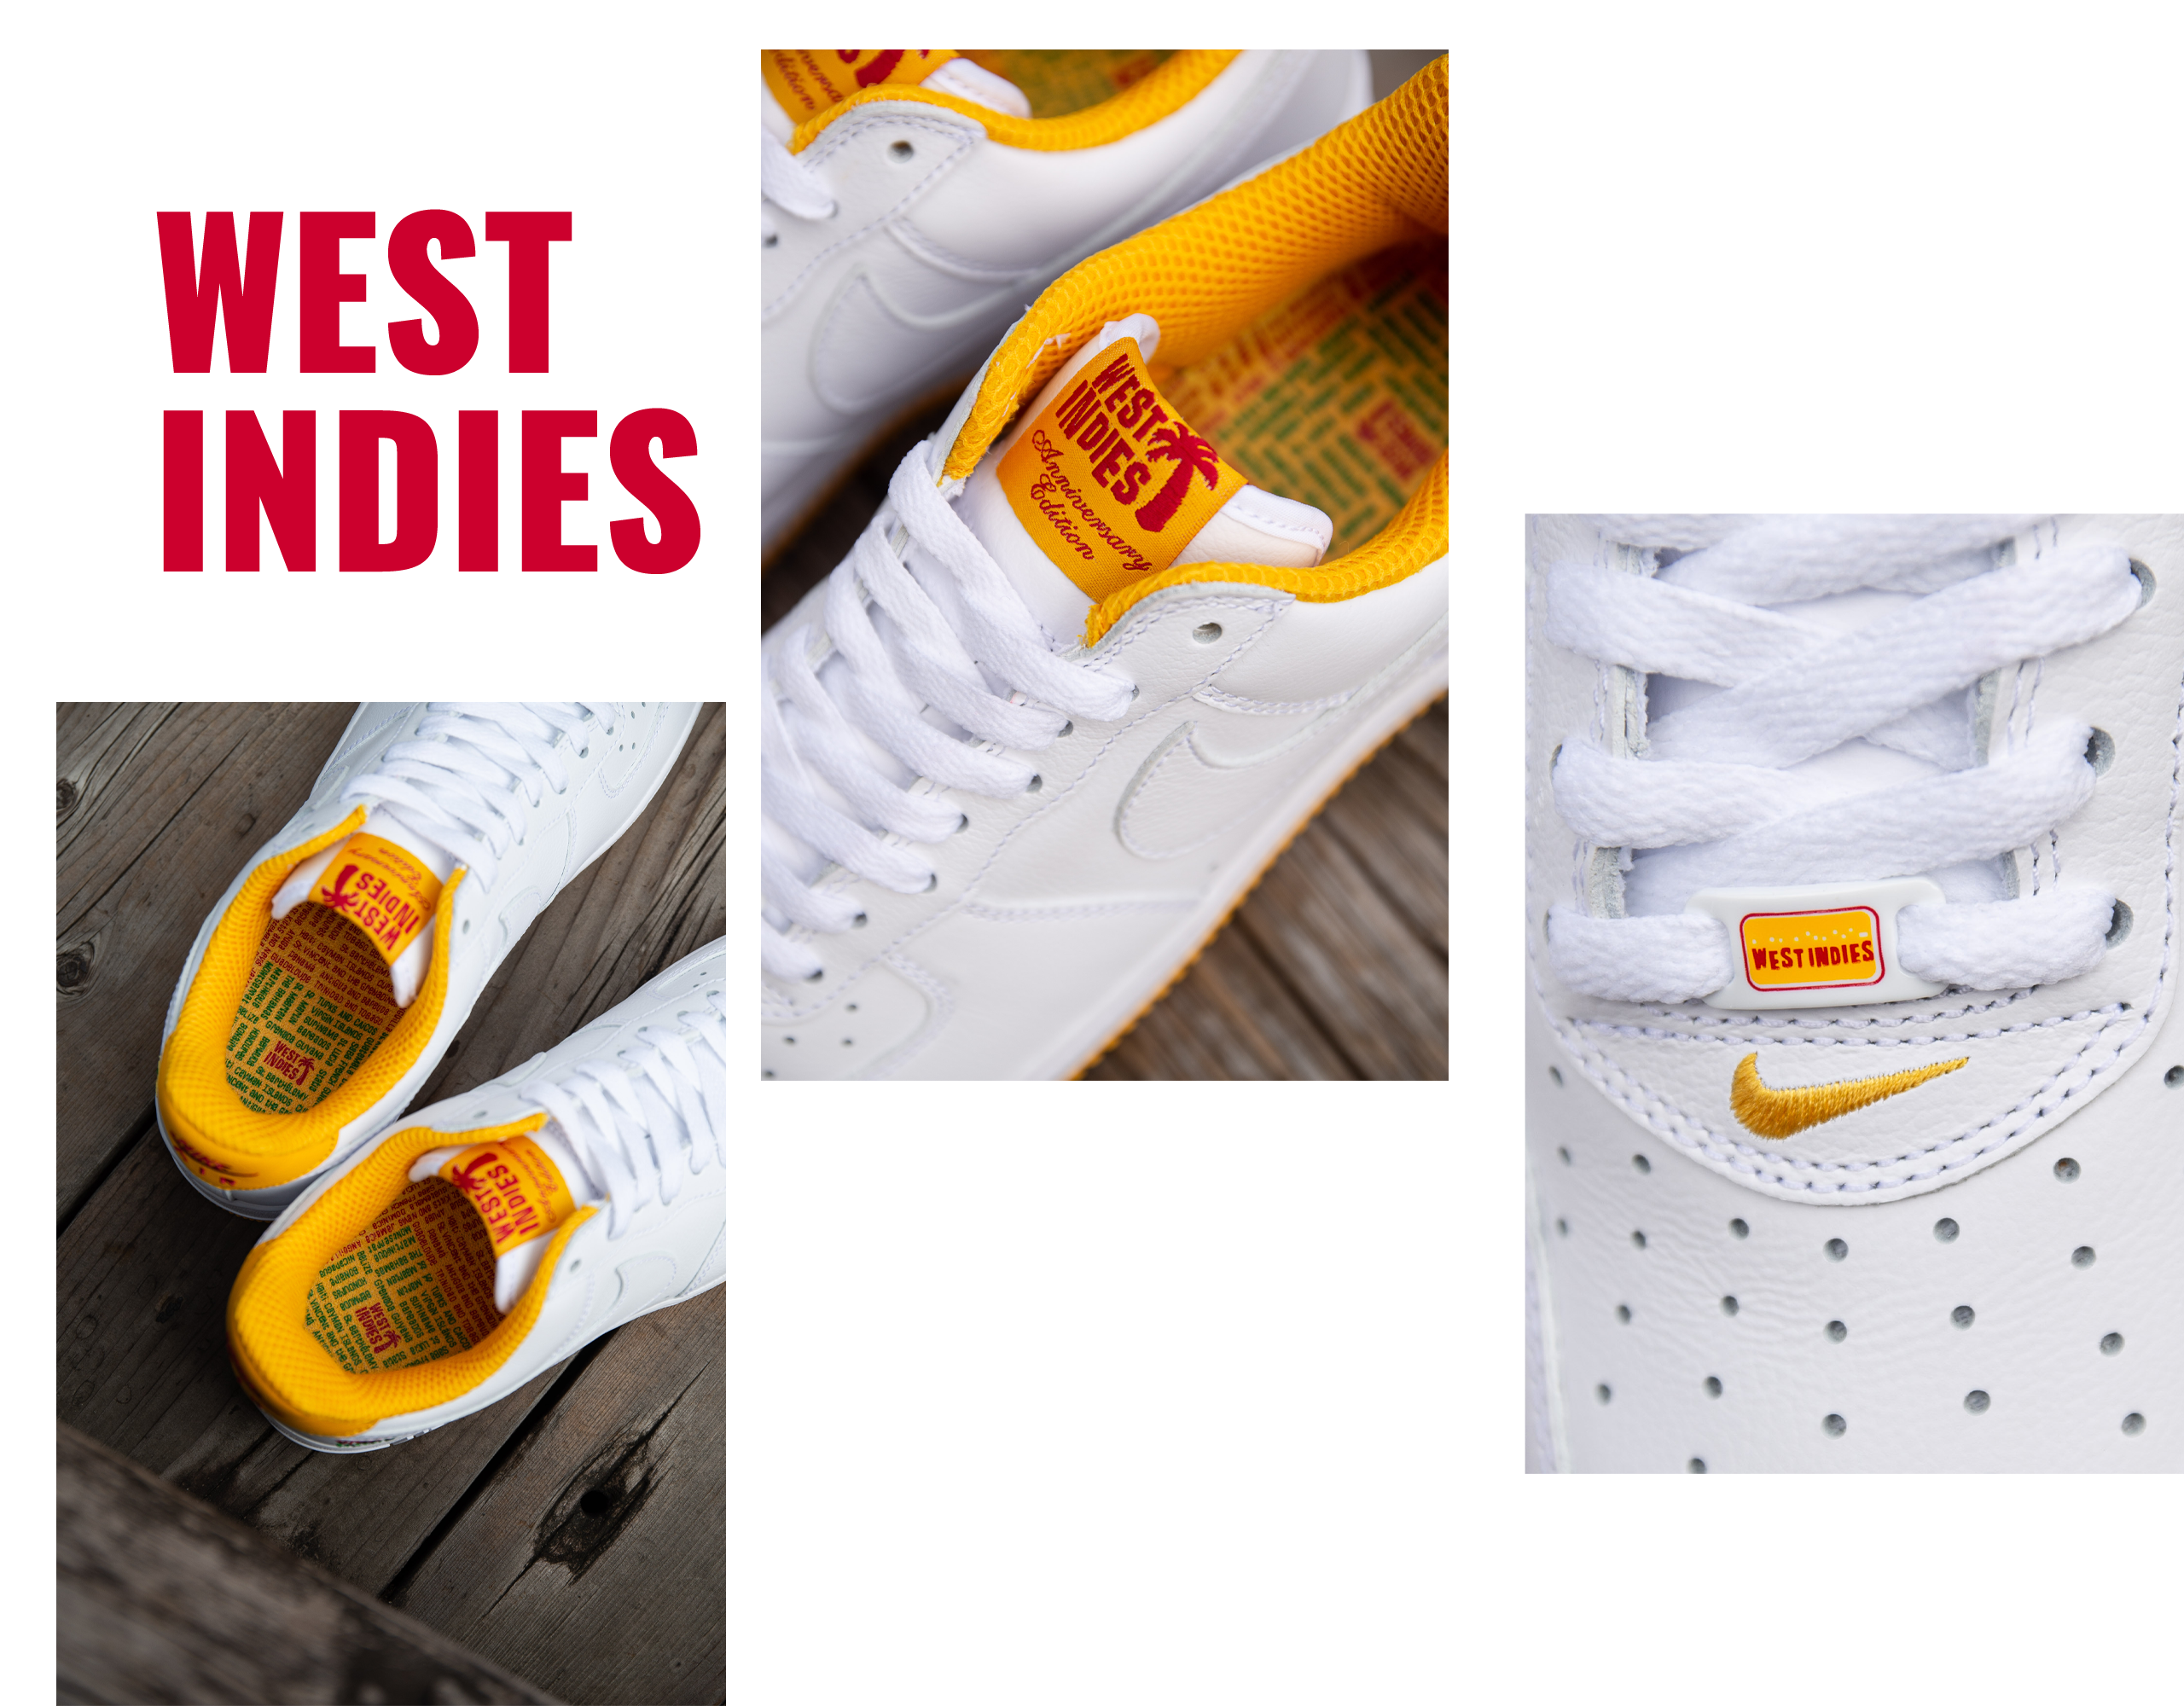 NIKE AIR FORCE 1 LOW RETRO QS “WEST INDIES”